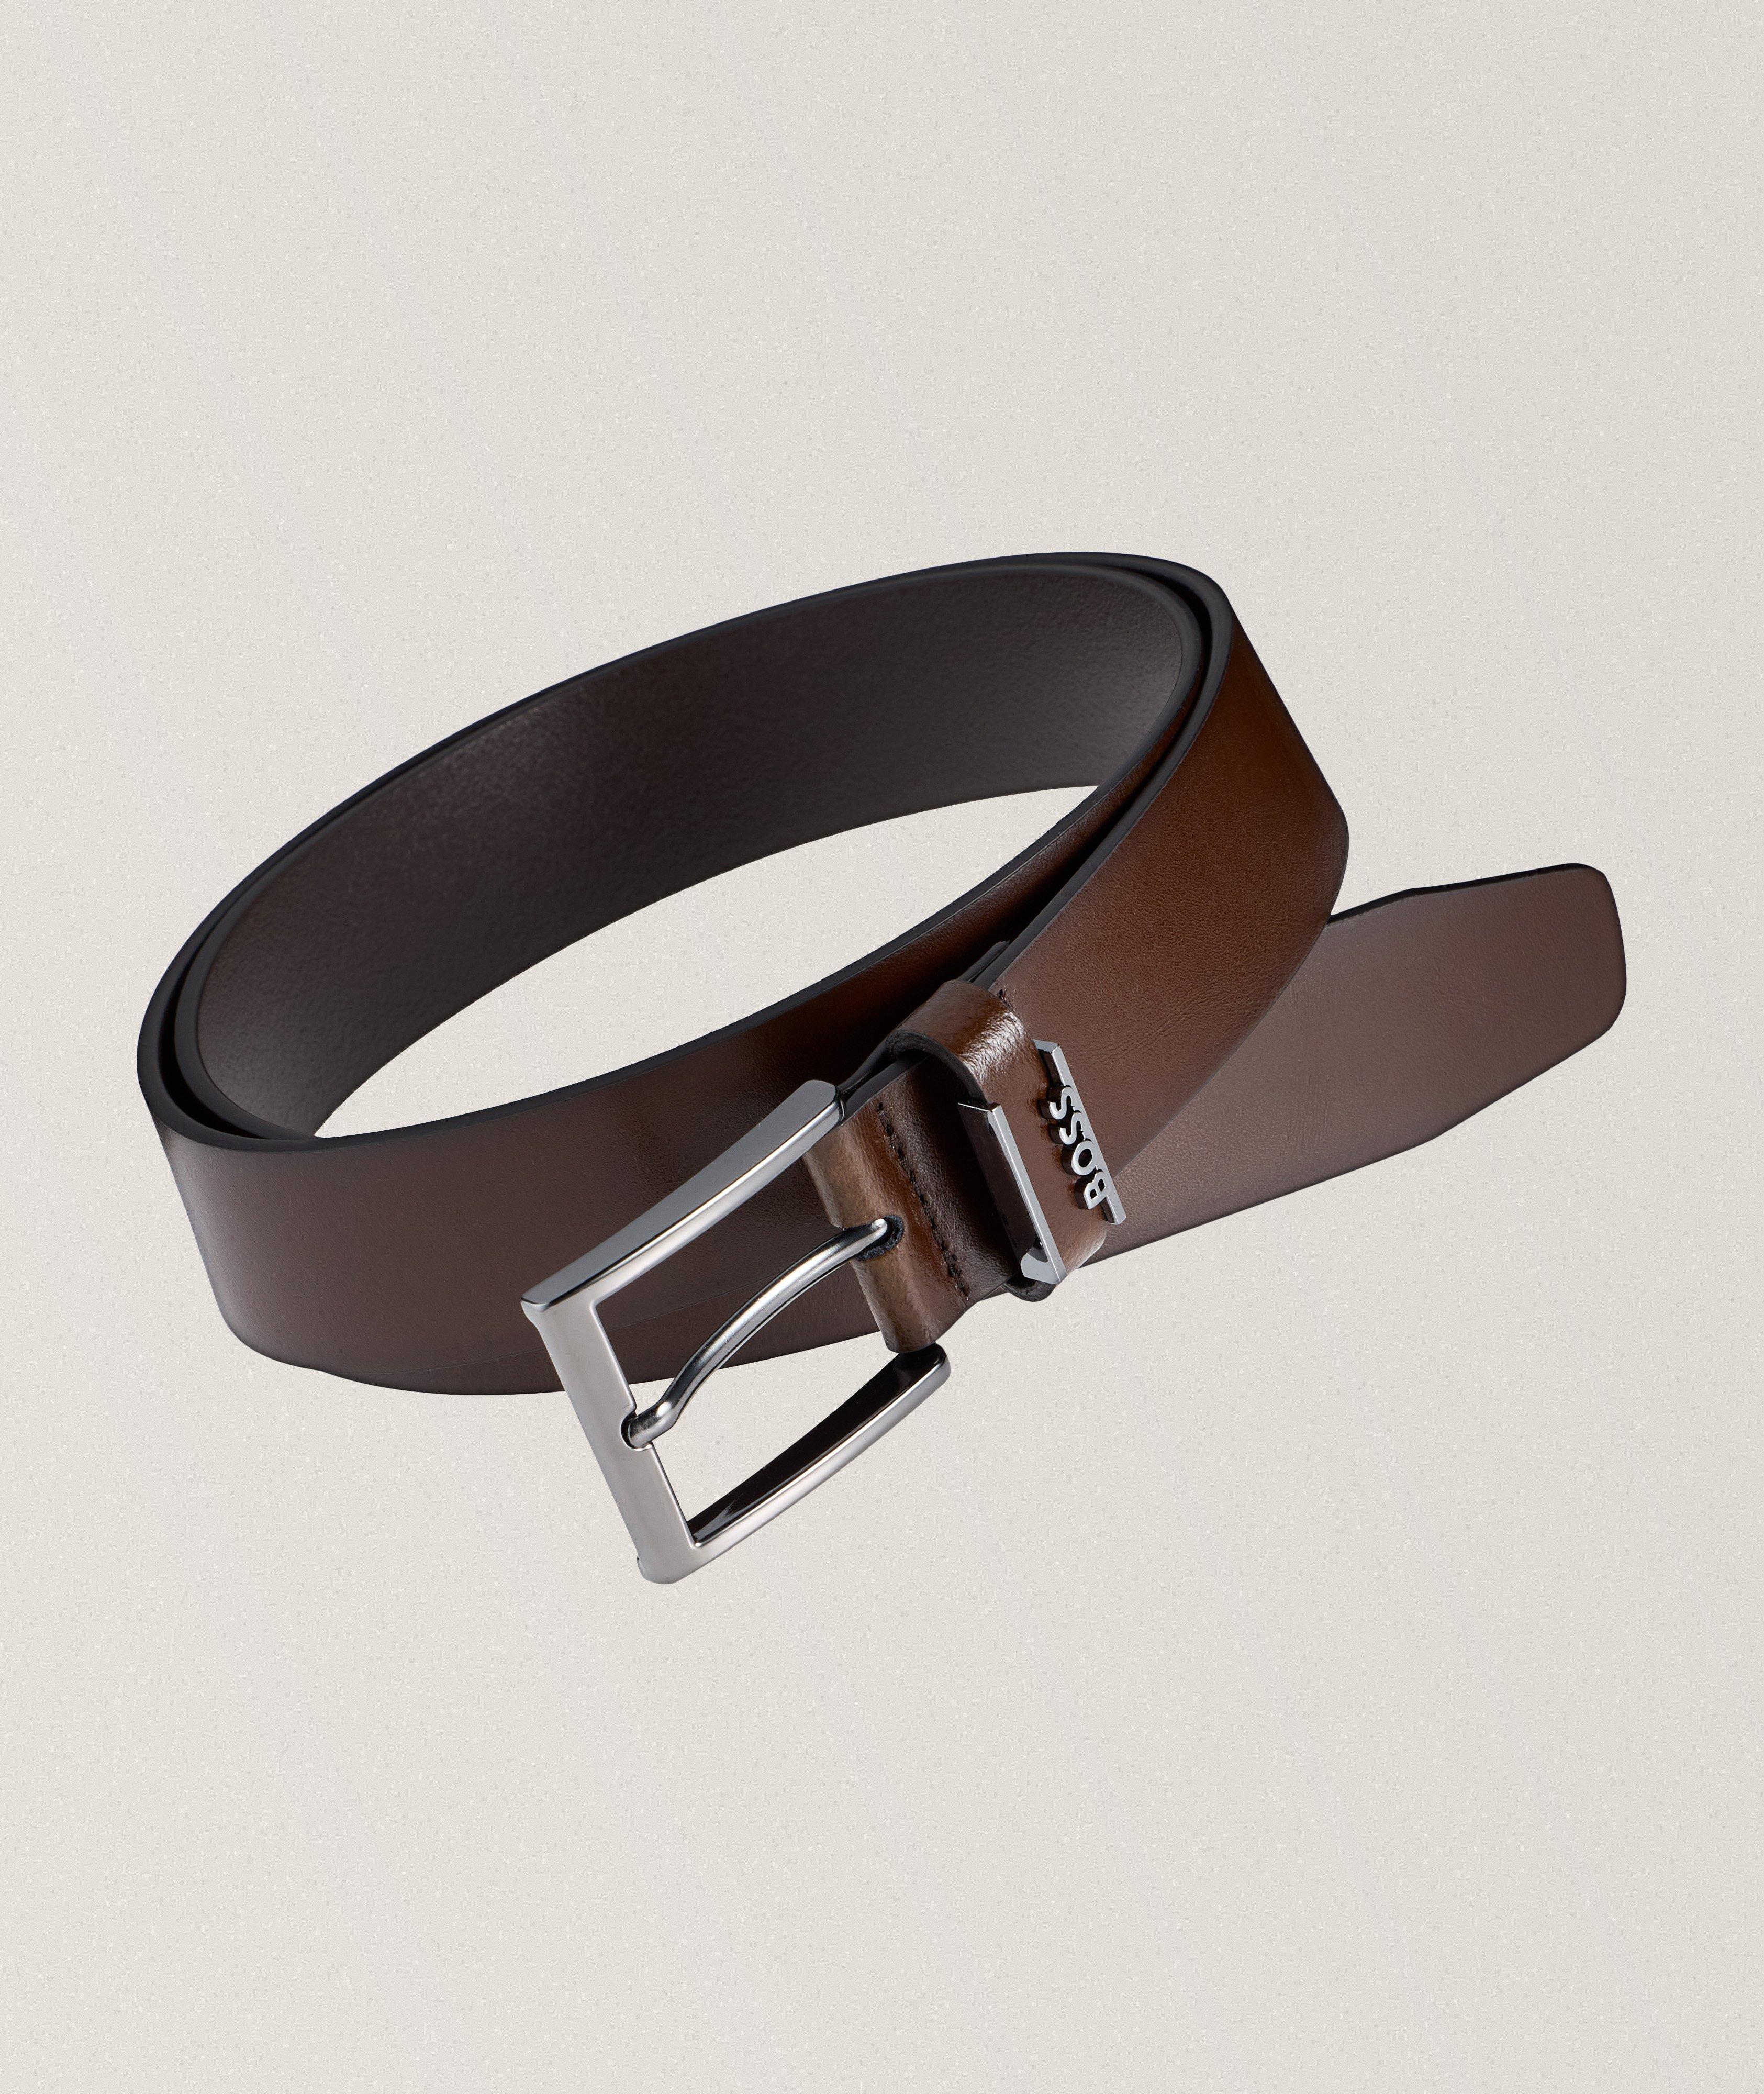 Leather Pin-Buckle Belt  image 0